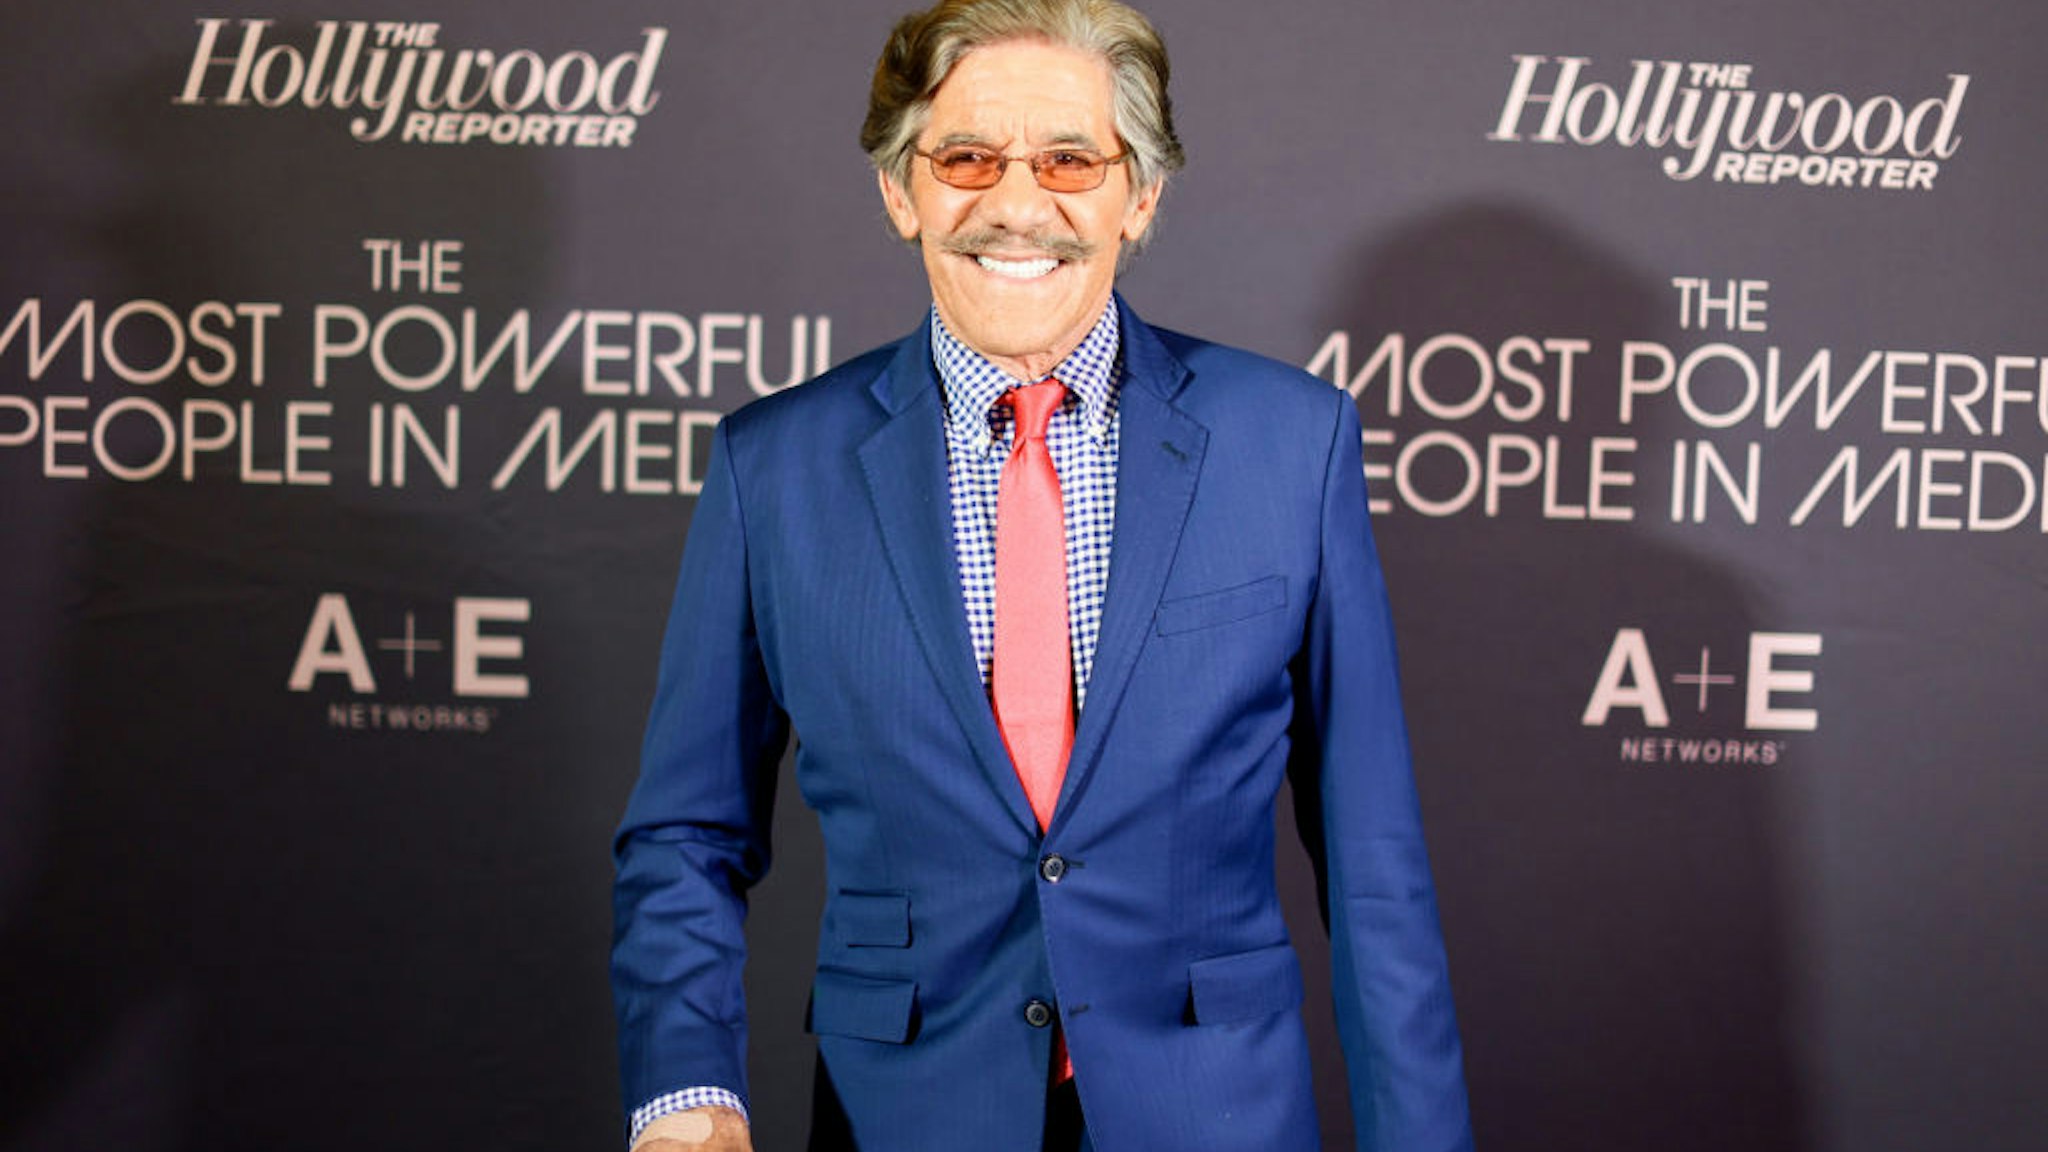 NEW YORK, NEW YORK - MAY 17: Geraldo Rivera attends The Hollywood Reporter Most Powerful People In Media Presented By A&amp;E at The Pool on May 17, 2022 in New York City. (Photo by Dimitrios Kambouris/Getty Images for The Hollywood Reporter)